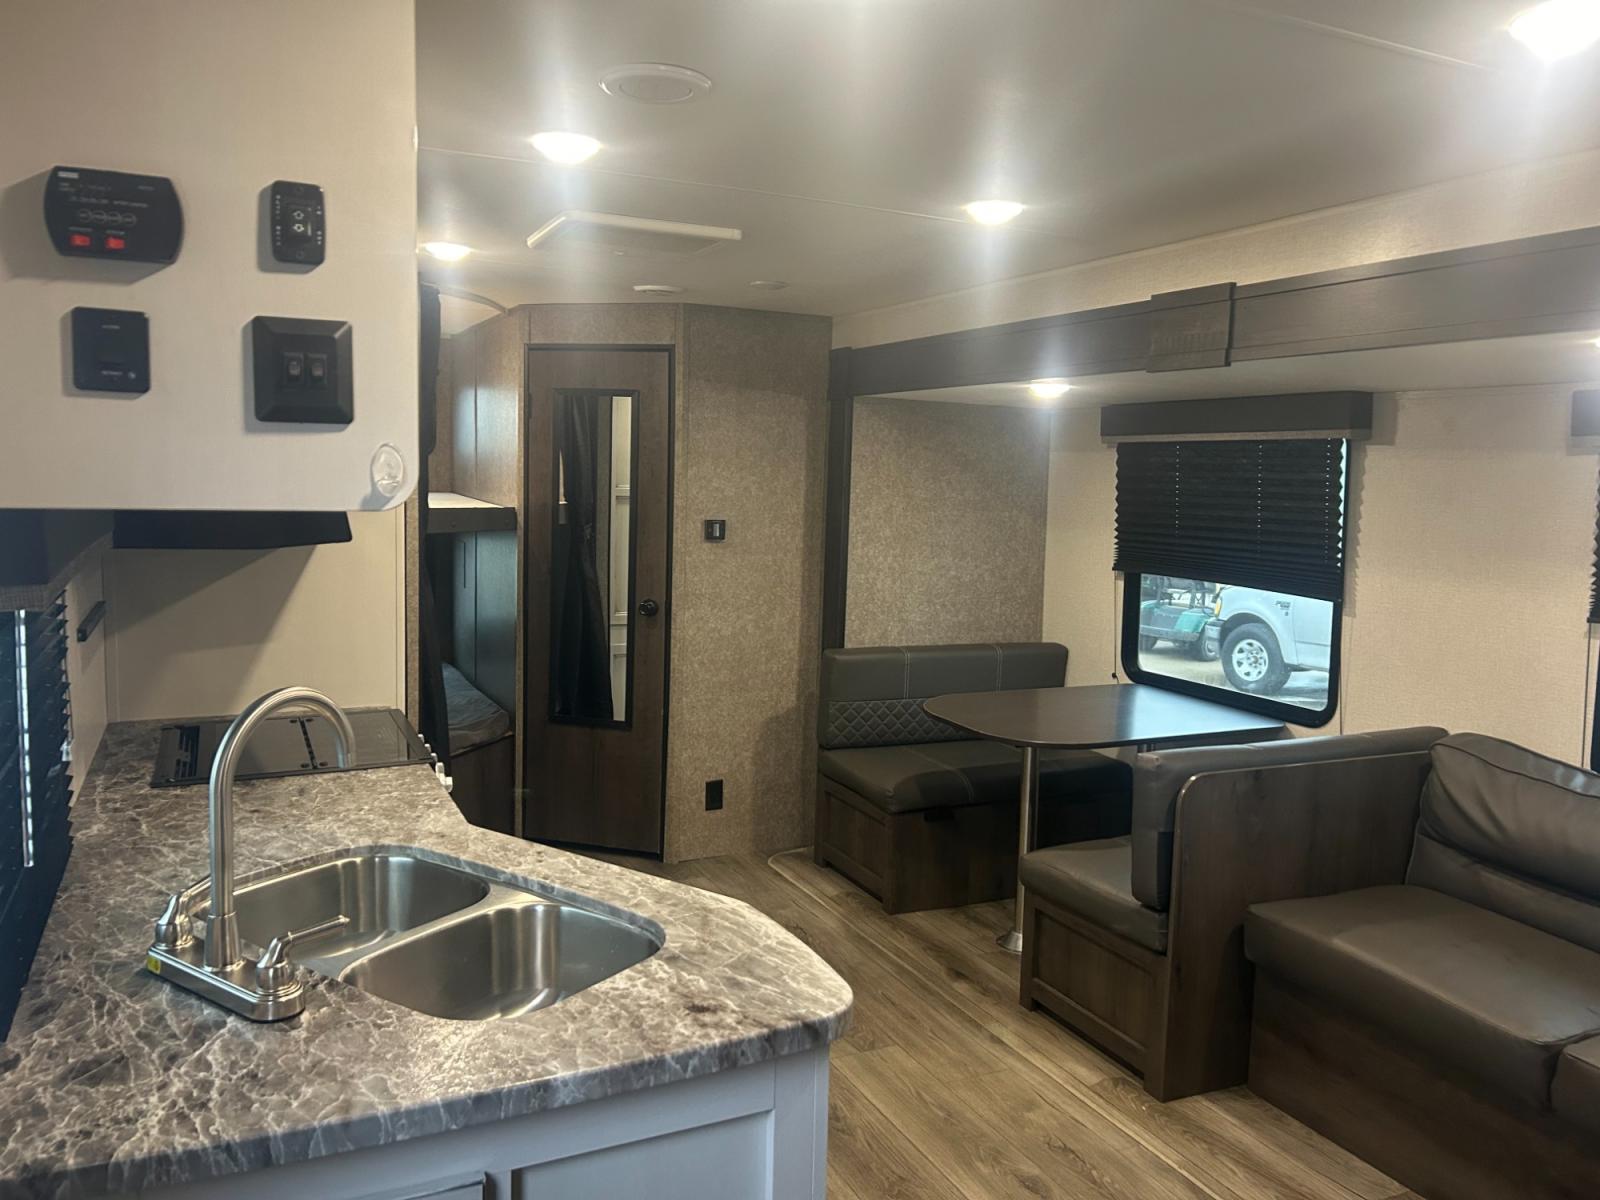 2021 White /TAN Highland Ridge RV, Inc OPEN RANGE 26BHS (58TBH0BP7M1) , located at 17760 Hwy 62, Morris, OK, 74445, 35.609104, -95.877060 - 2021 HIGHLAND RIDGE OPEN RANGE IS PERFECT FOR A SMALL FAMILY OR A LARGE. THIS CAMPER IS 30.5FT LONG AND WILL SLEEP 10 PEOPLE. FEATURES A 16FT POWER AWNING, OUTSIDE STORAGE, DOUBLE AXEL, SINGLE SLIDE OUT, POWER HITCH, AND MANUAL JACKS. IN THE FRONT OF THIS CAMPER IS A QUEEN SIZED BED WITH OVERHEAD ST - Photo #10